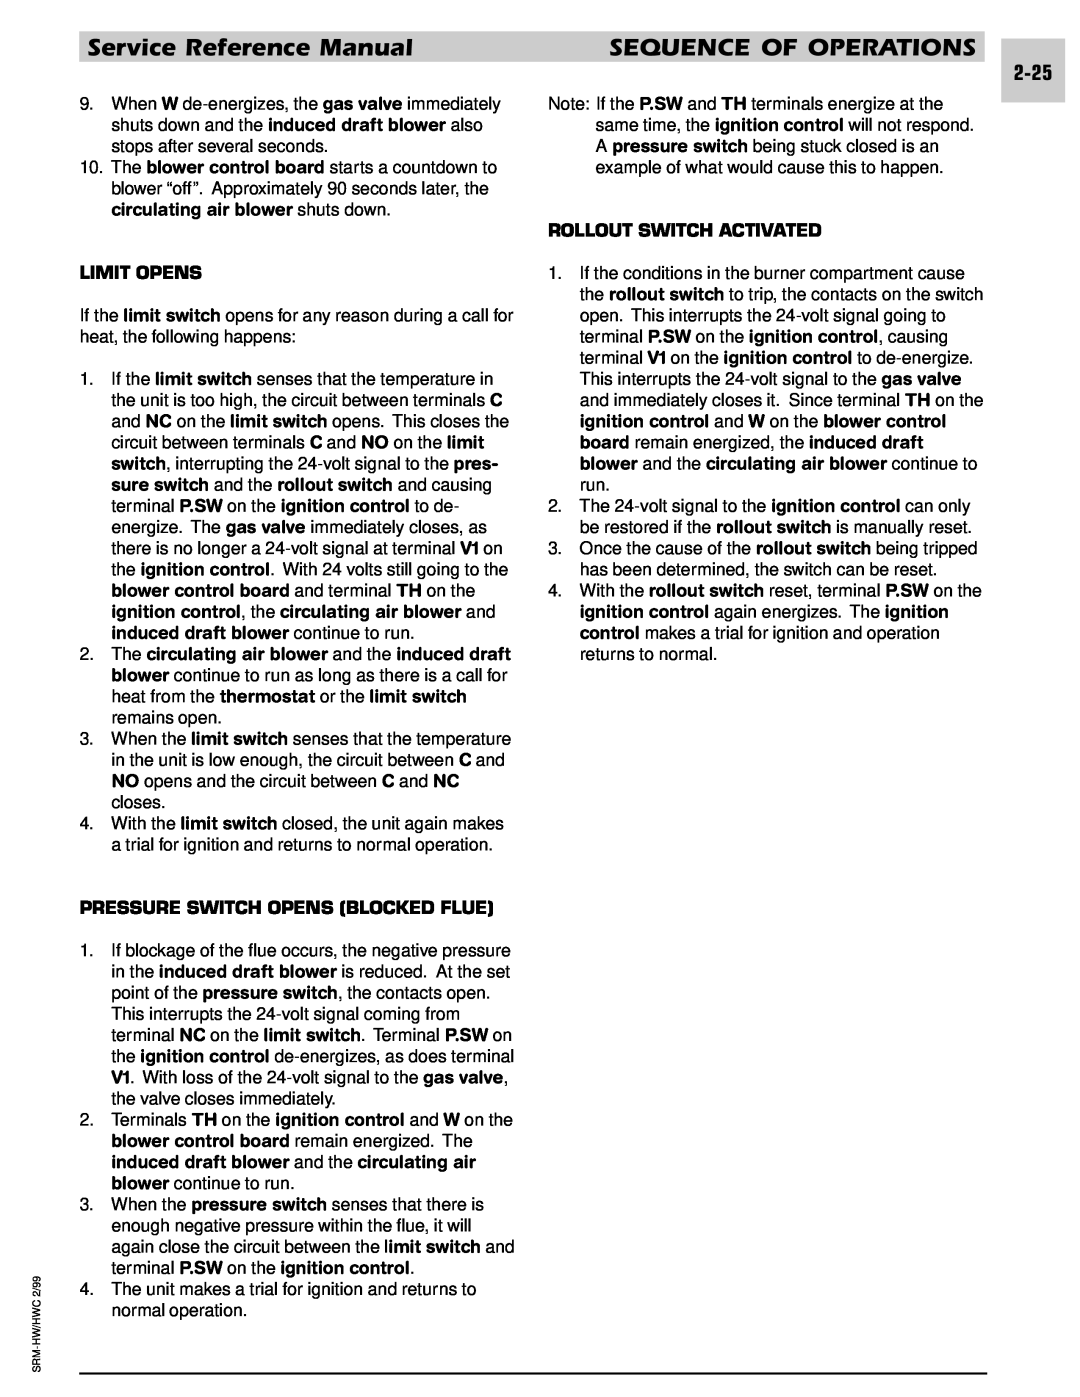 Armstrong World Industries 122 Service Reference Manual, Sequence Of Operations, Limit Opens, Rollout Switch Activated 